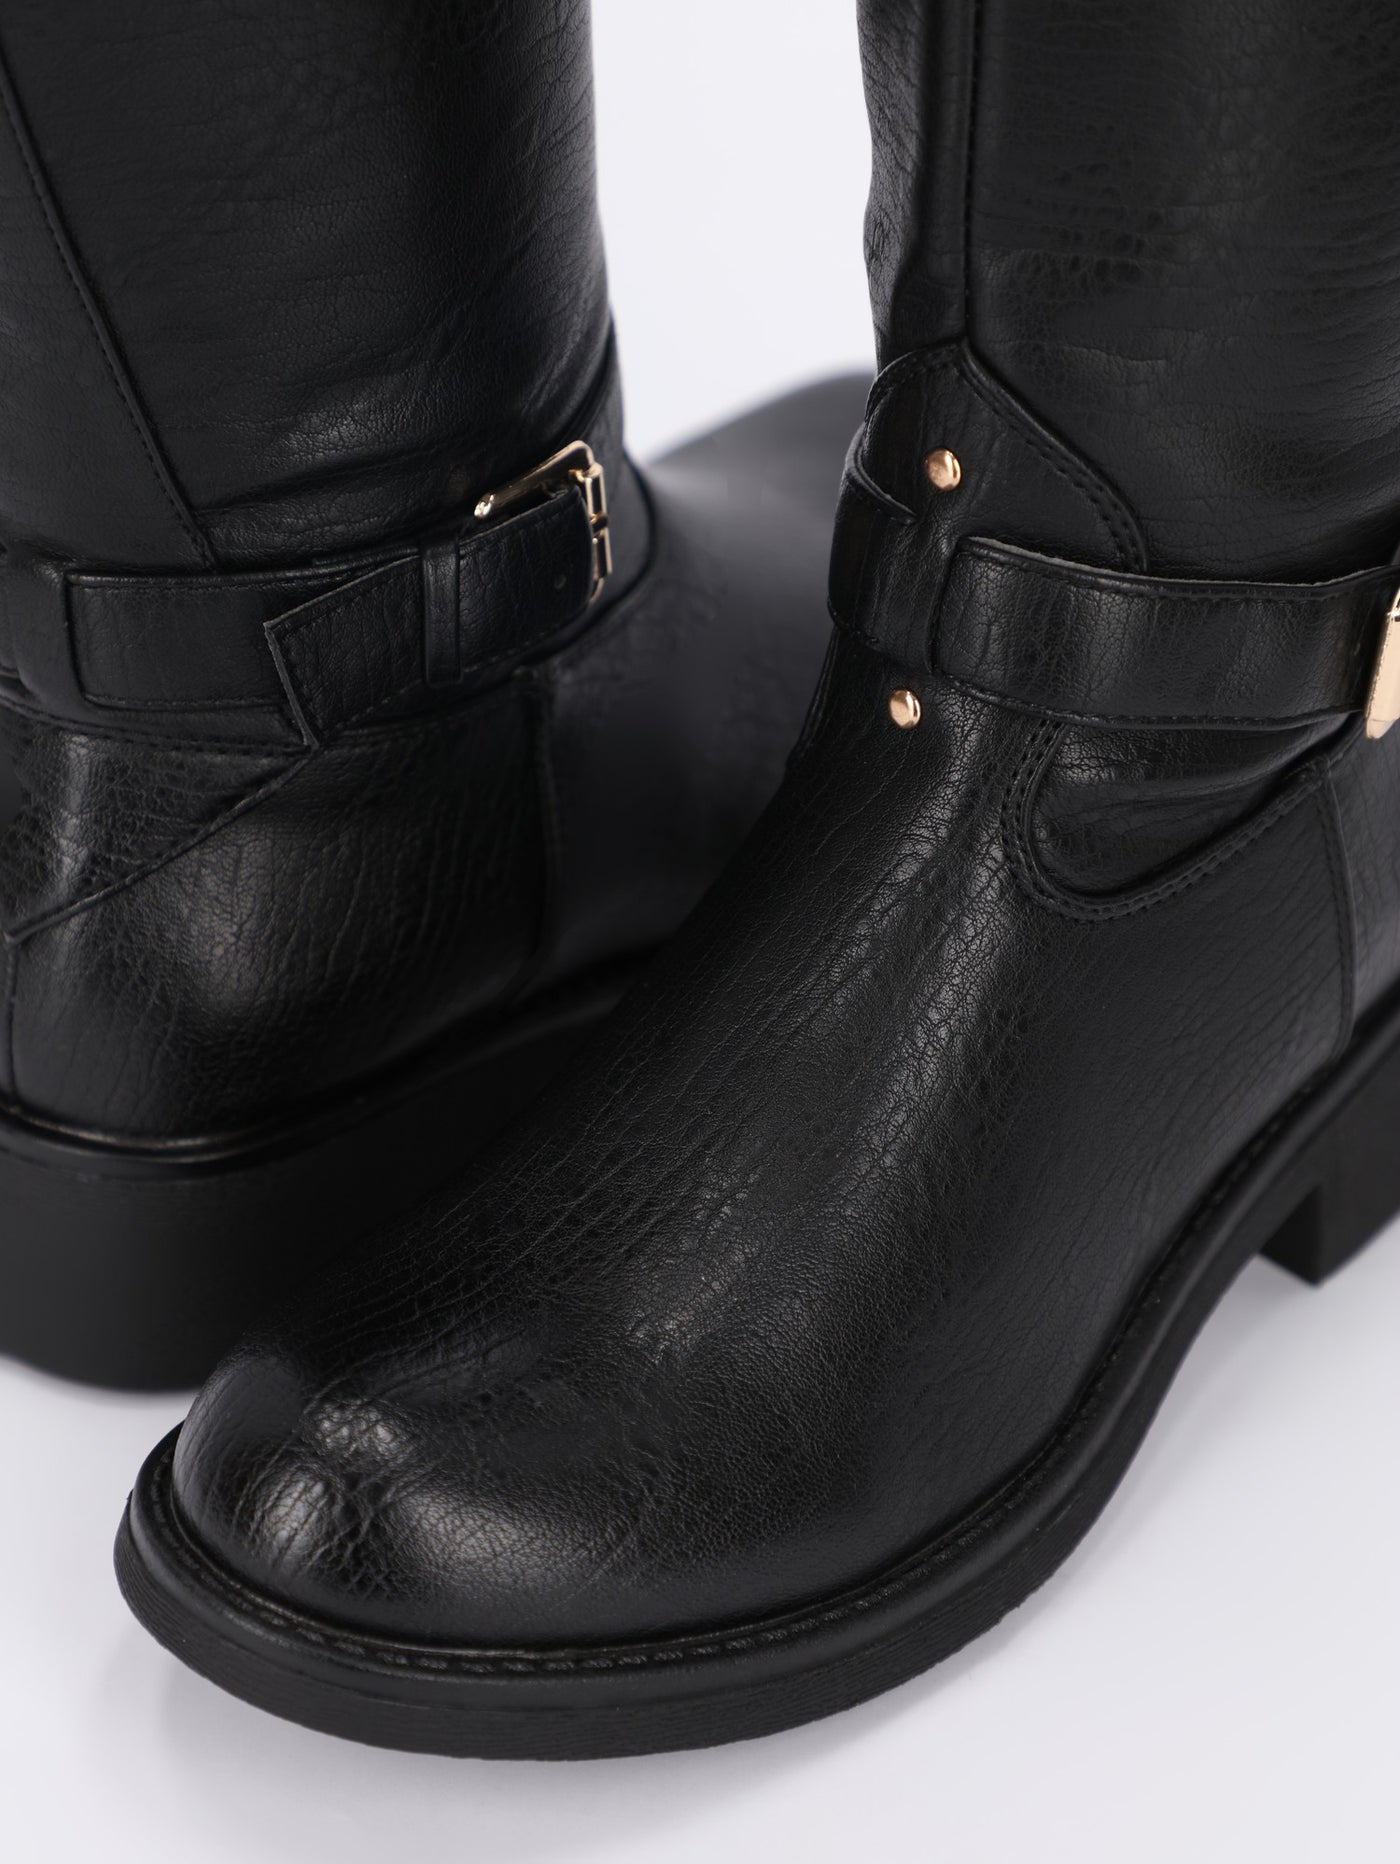 Leather Decorative Buckle High-Calf Boot